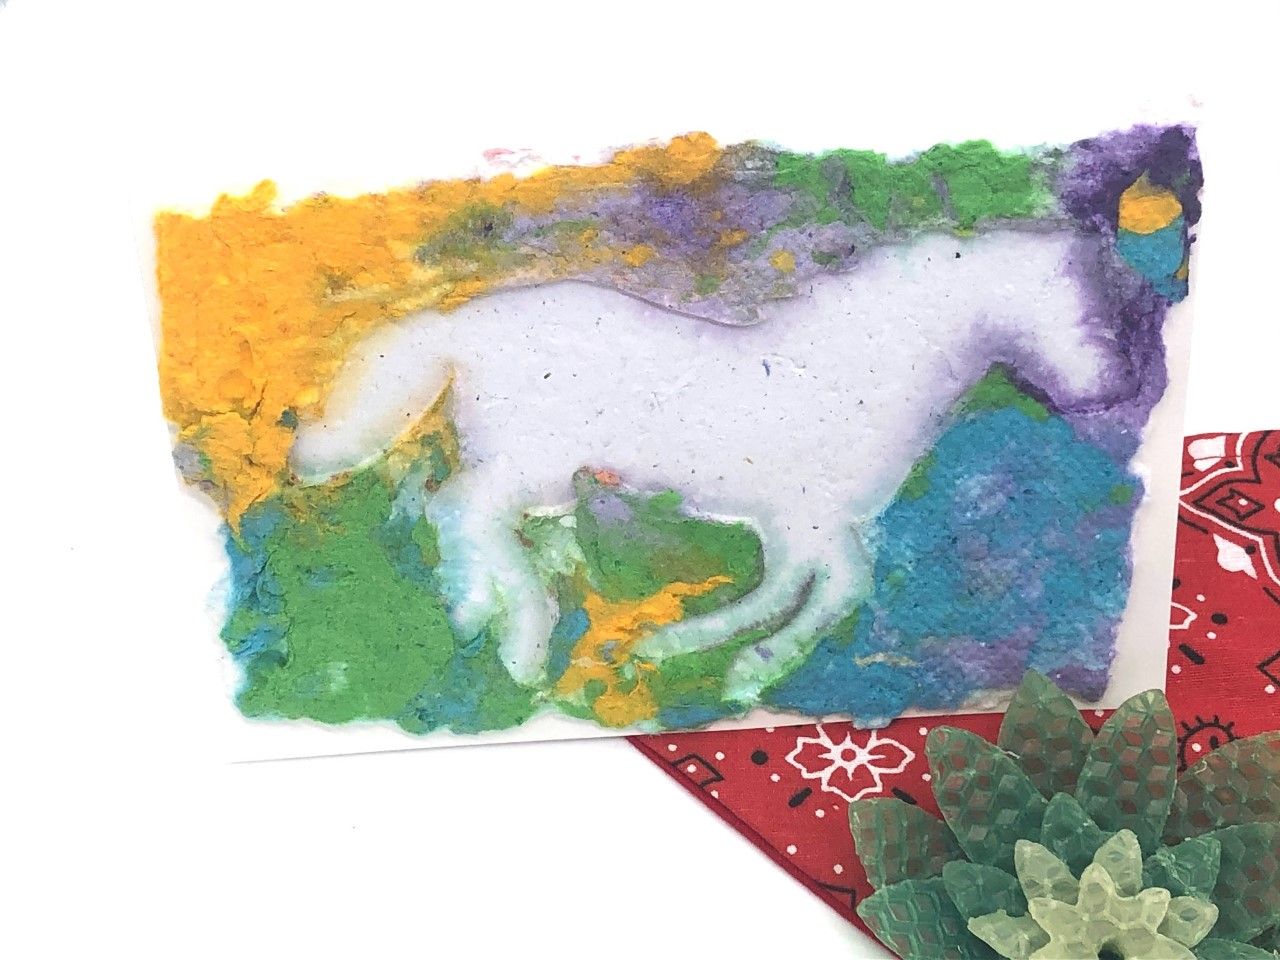 card with handmade paper design of a horse. vivid colors of purple, yellow and green